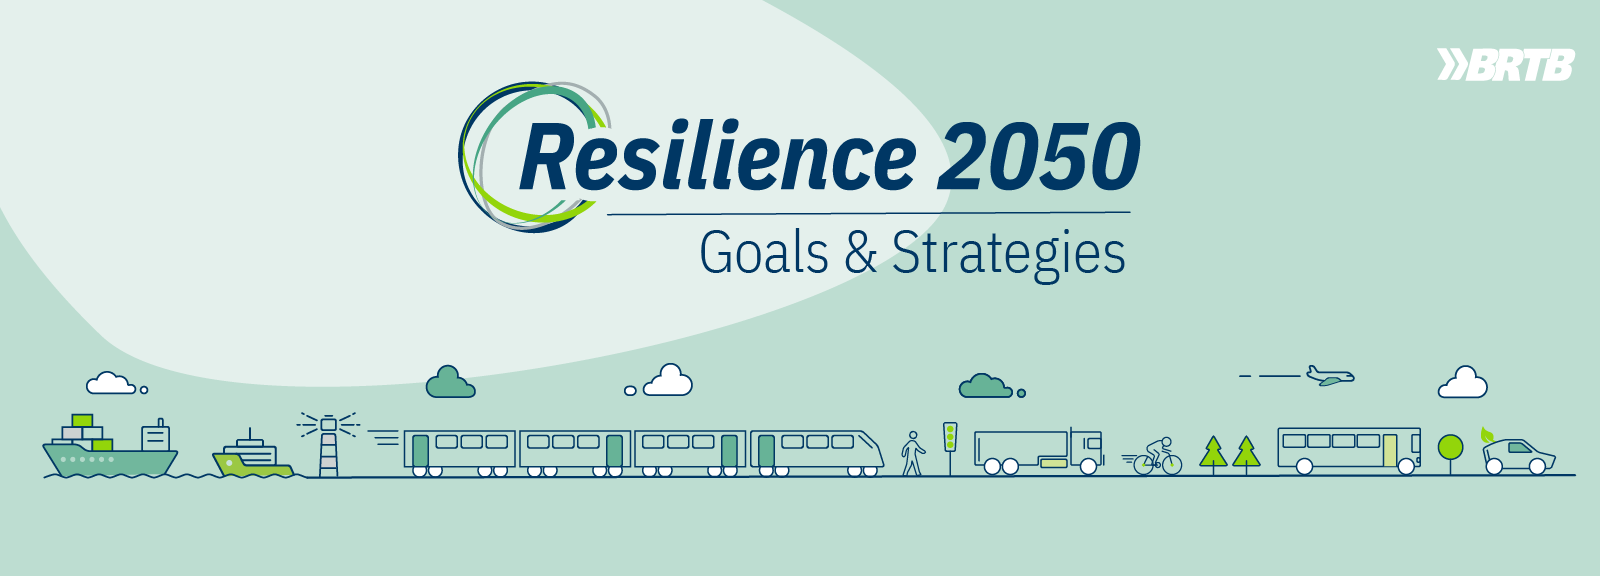 Resilience 2050